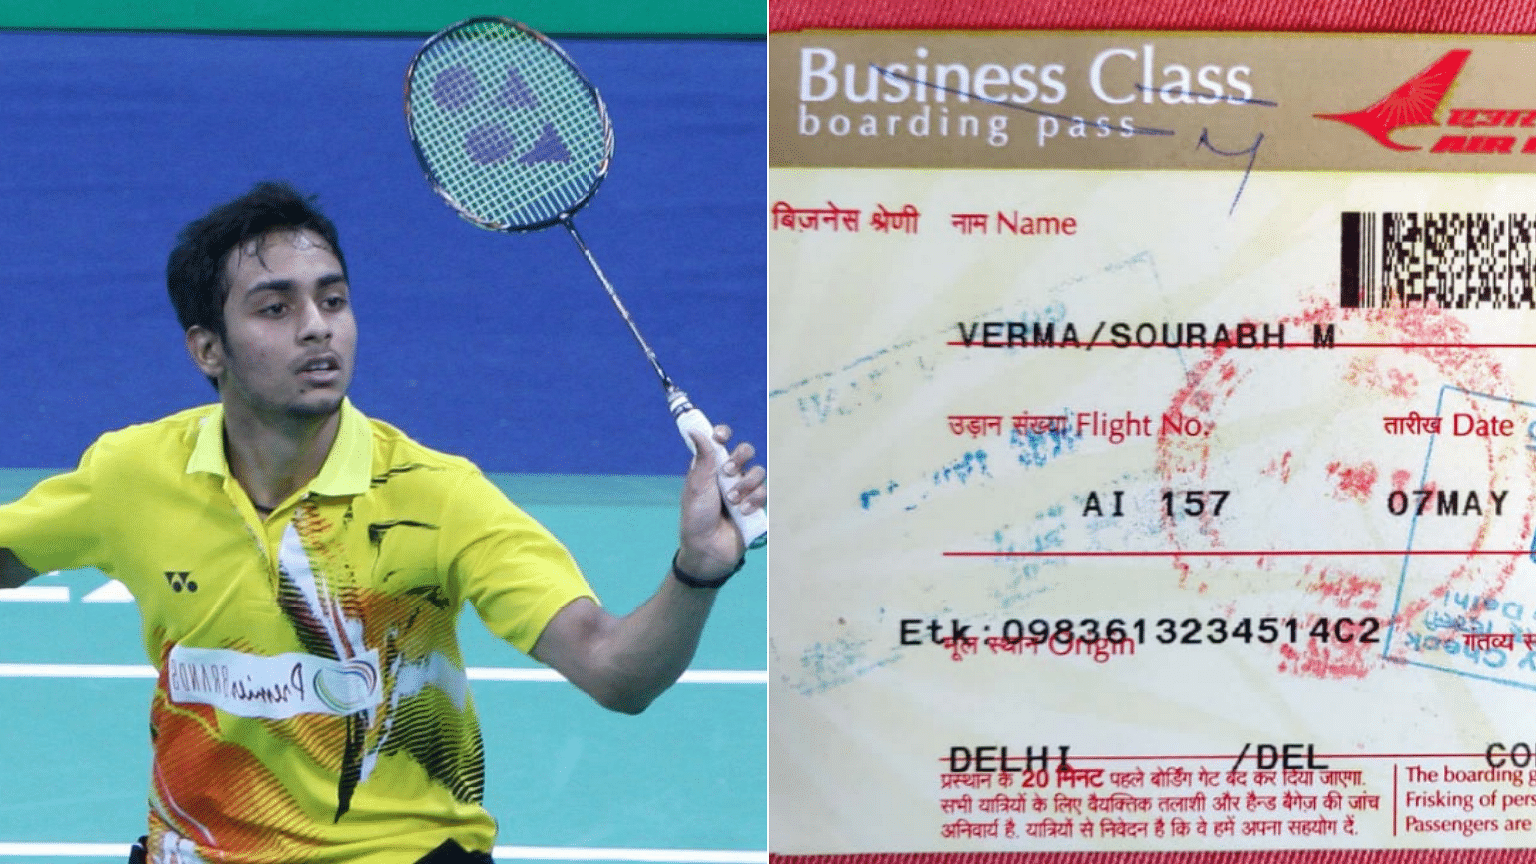 Shuttler Sourabh Verma on Sunday, 26 May, slammed the Air India support staff for damaging his bag in transit.